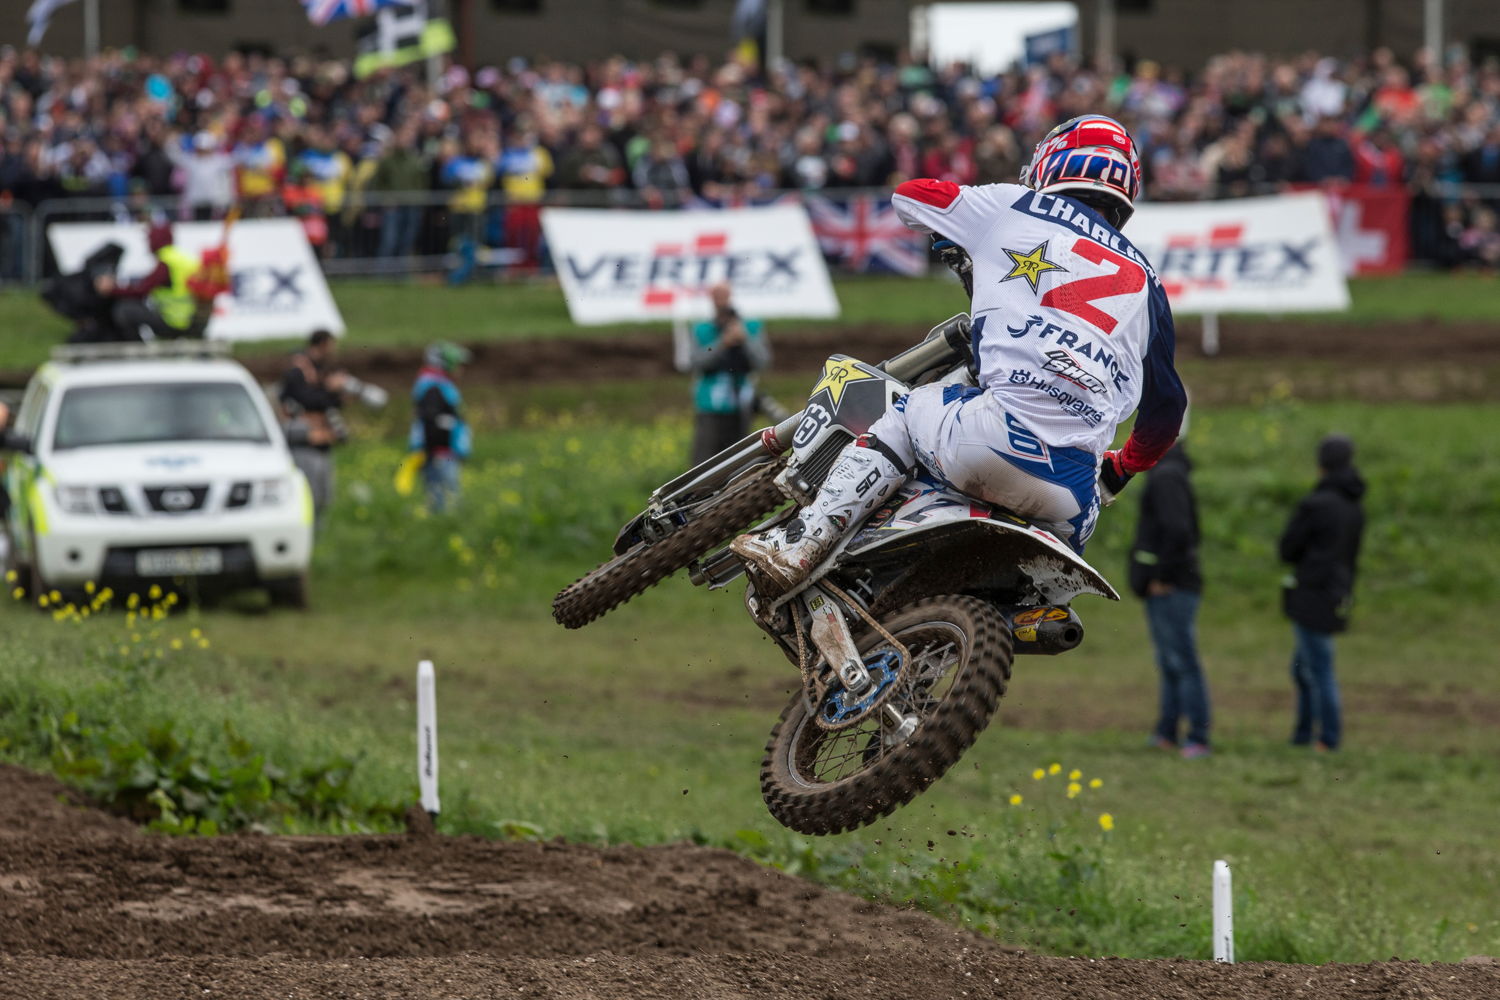 Charlier at the Motocross of Nations, credit: Juan Pablo Acevedo